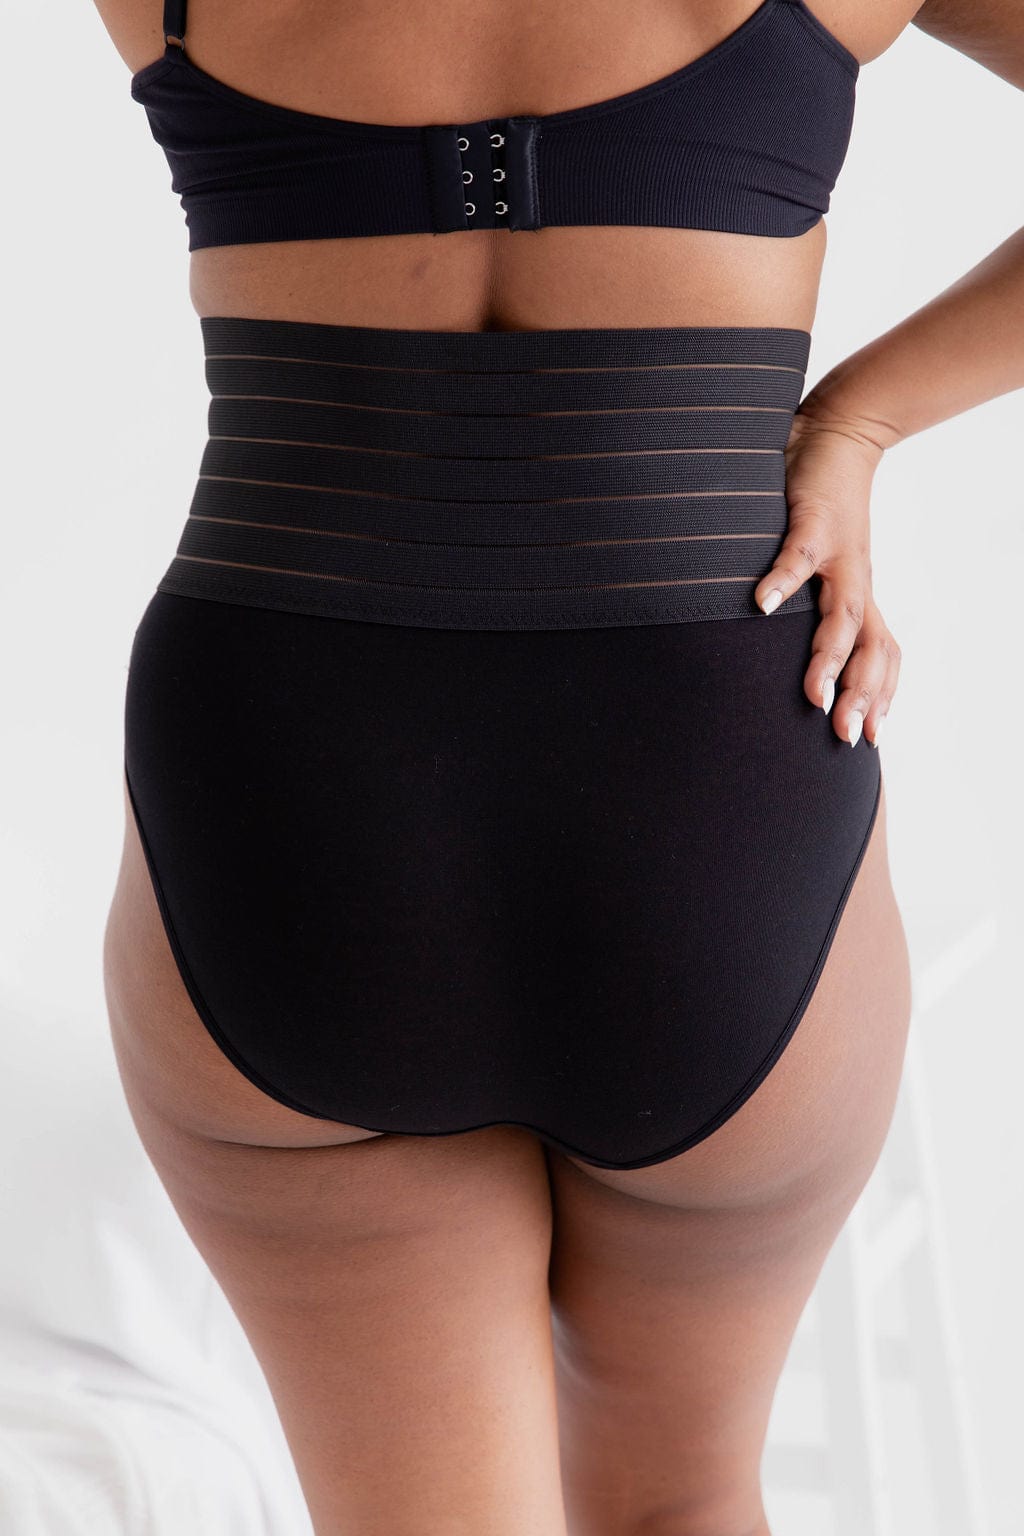 High Waisted Shaping Black Underwear - $14.00 - Underwear - Naked Curve